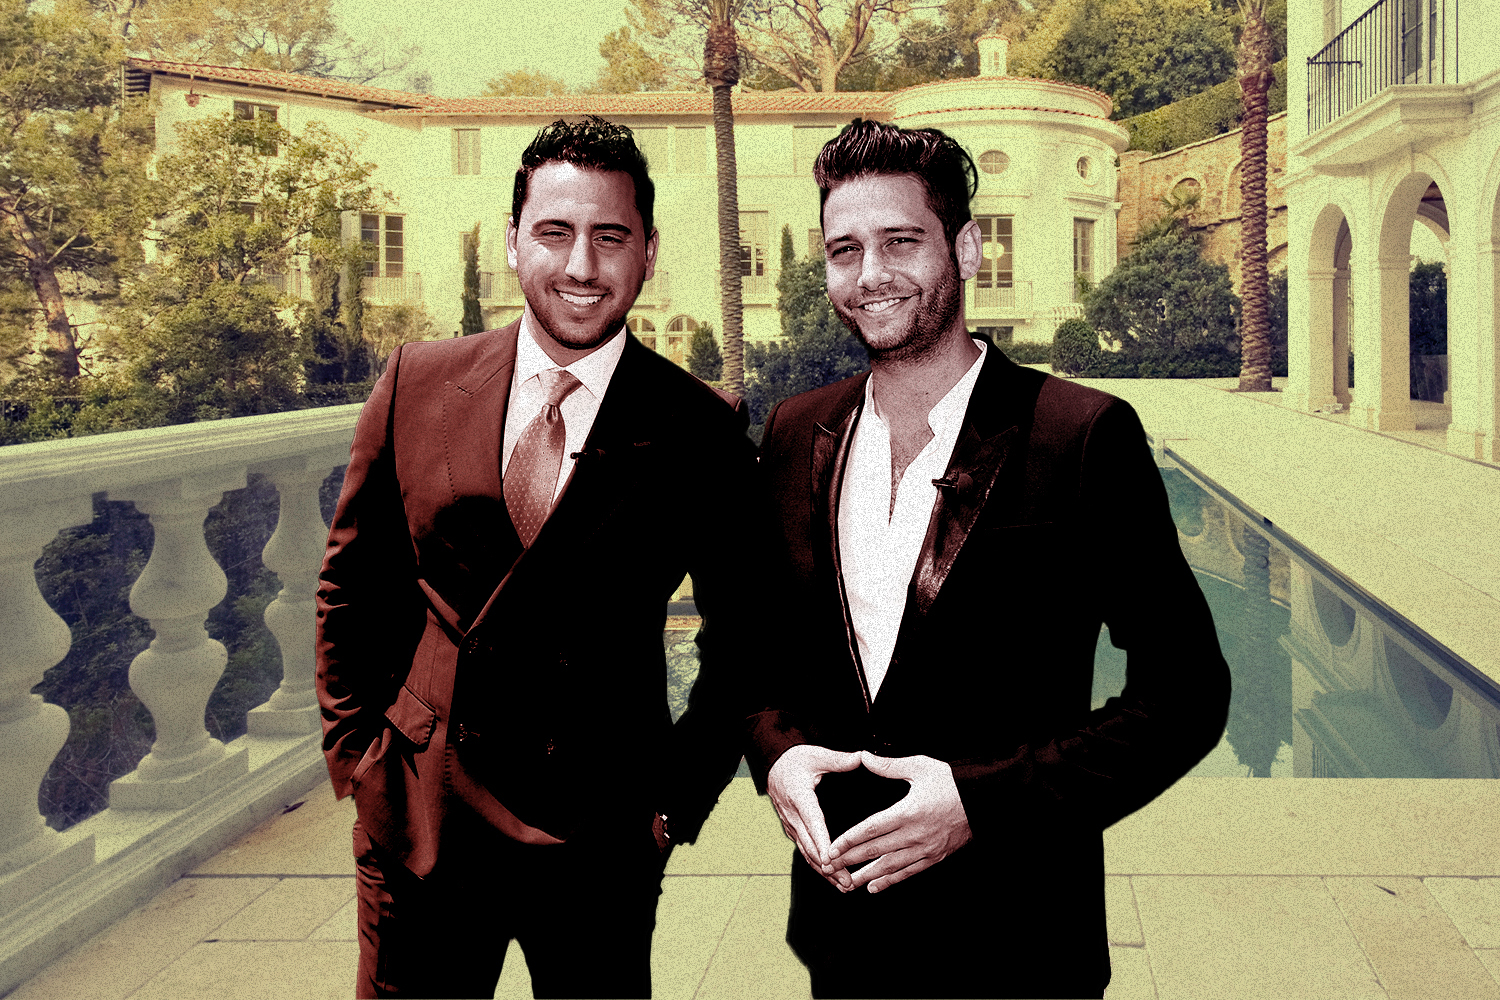 “Million Dollar Listing” Can’t Hide the Grim Realities of the American Housing Market